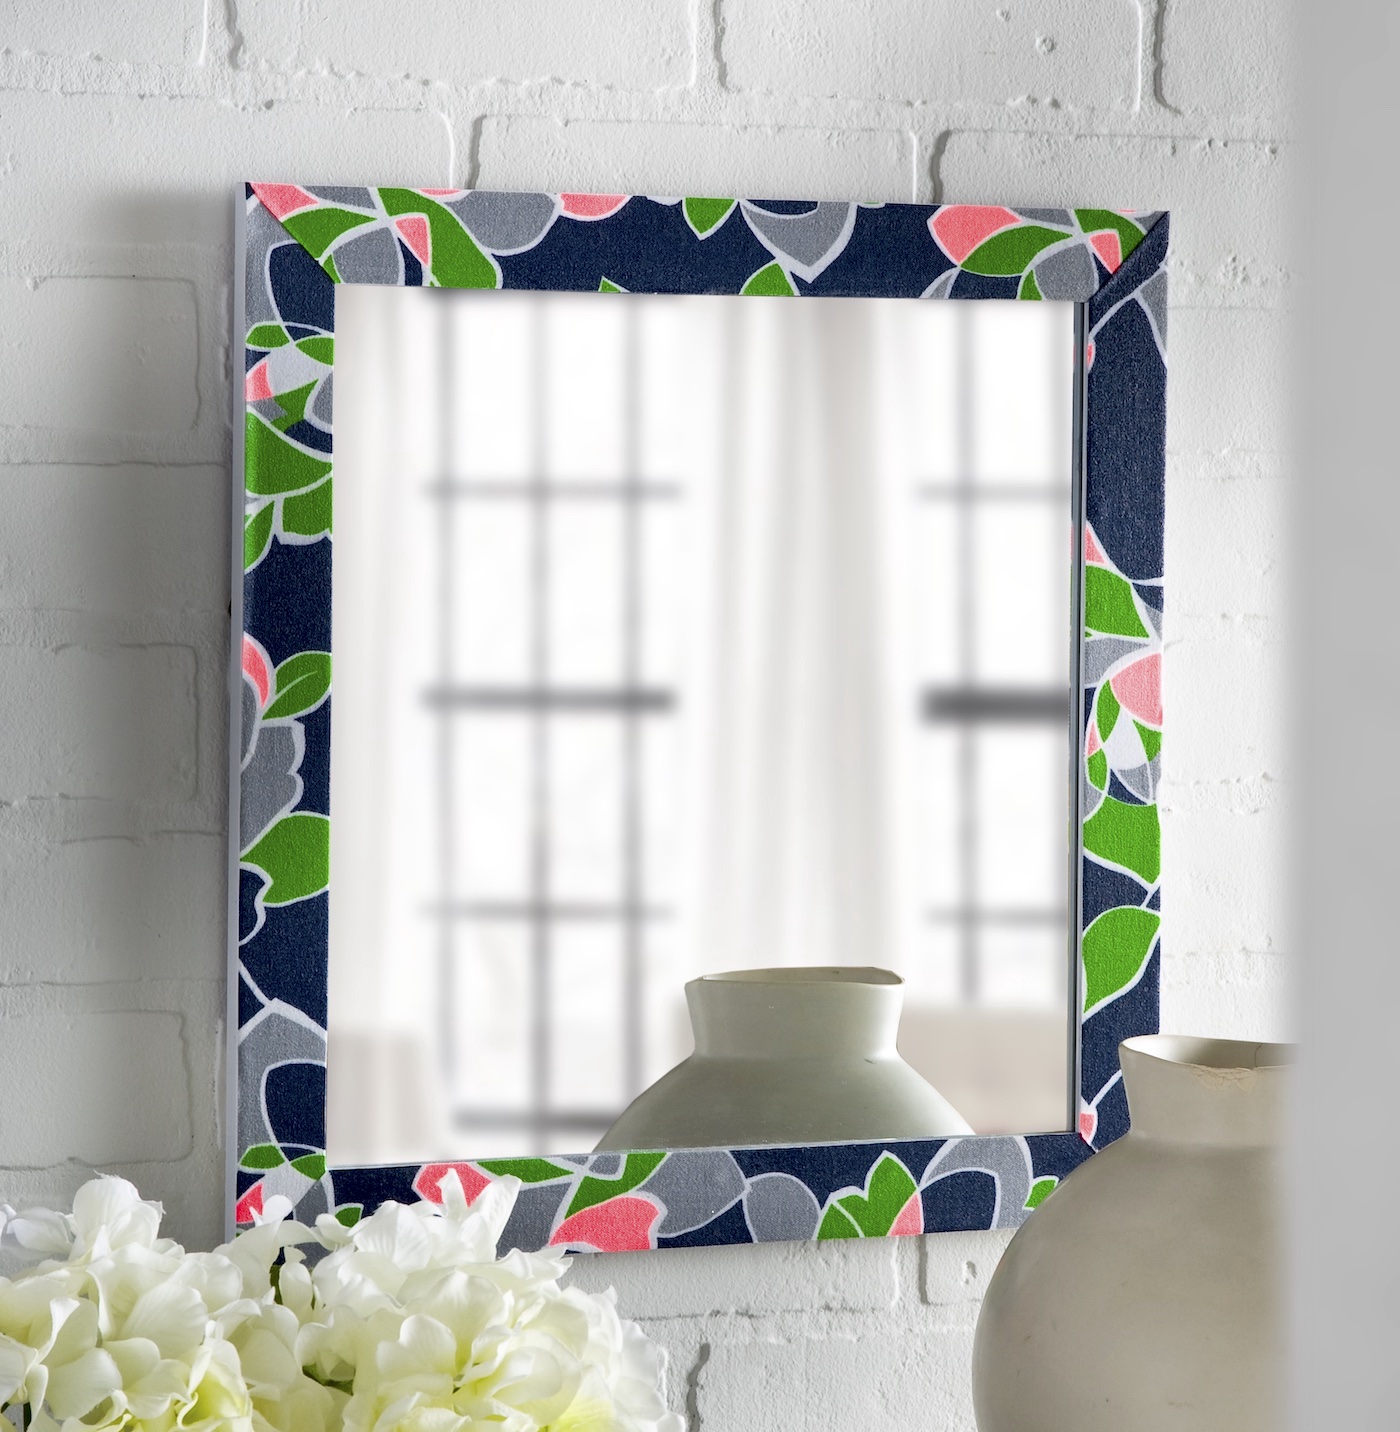 How to decorate a mirror frame